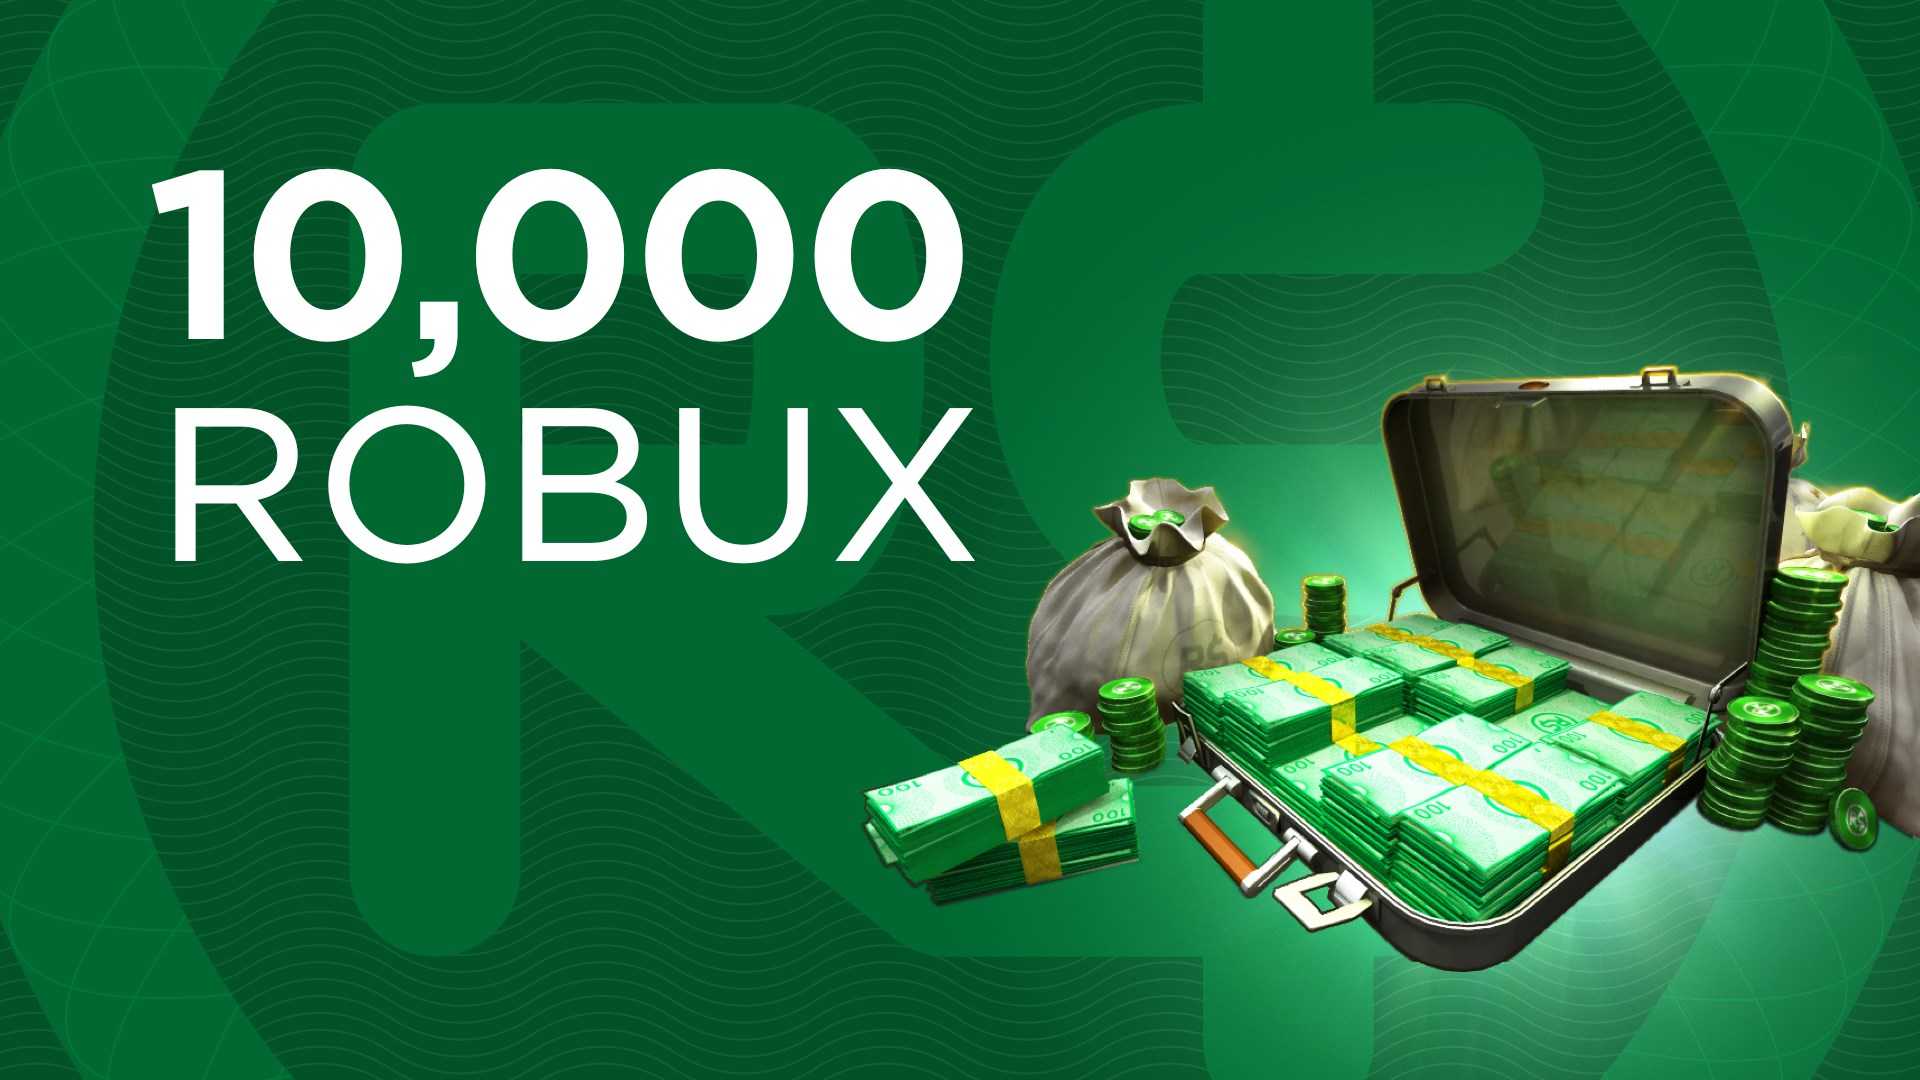 8. "1000 Robux Promo Deal" - wide 6